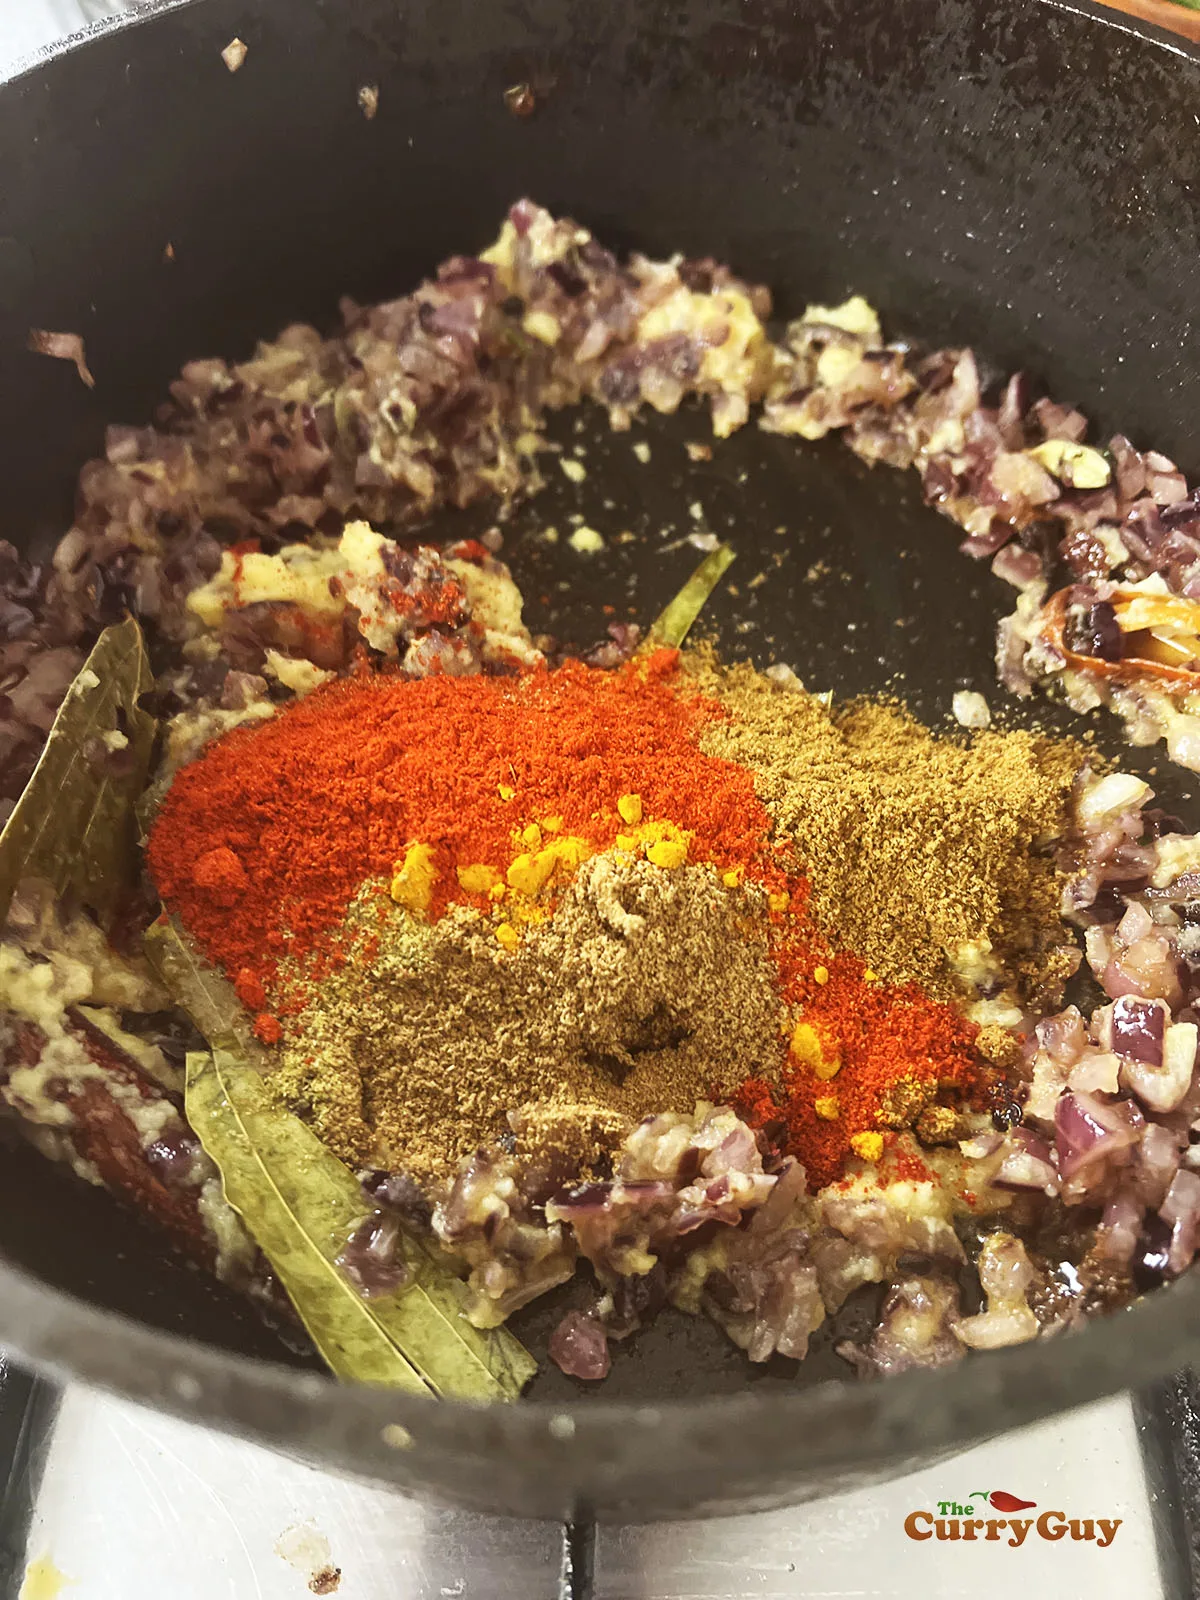 Adding the ground spices to the pan